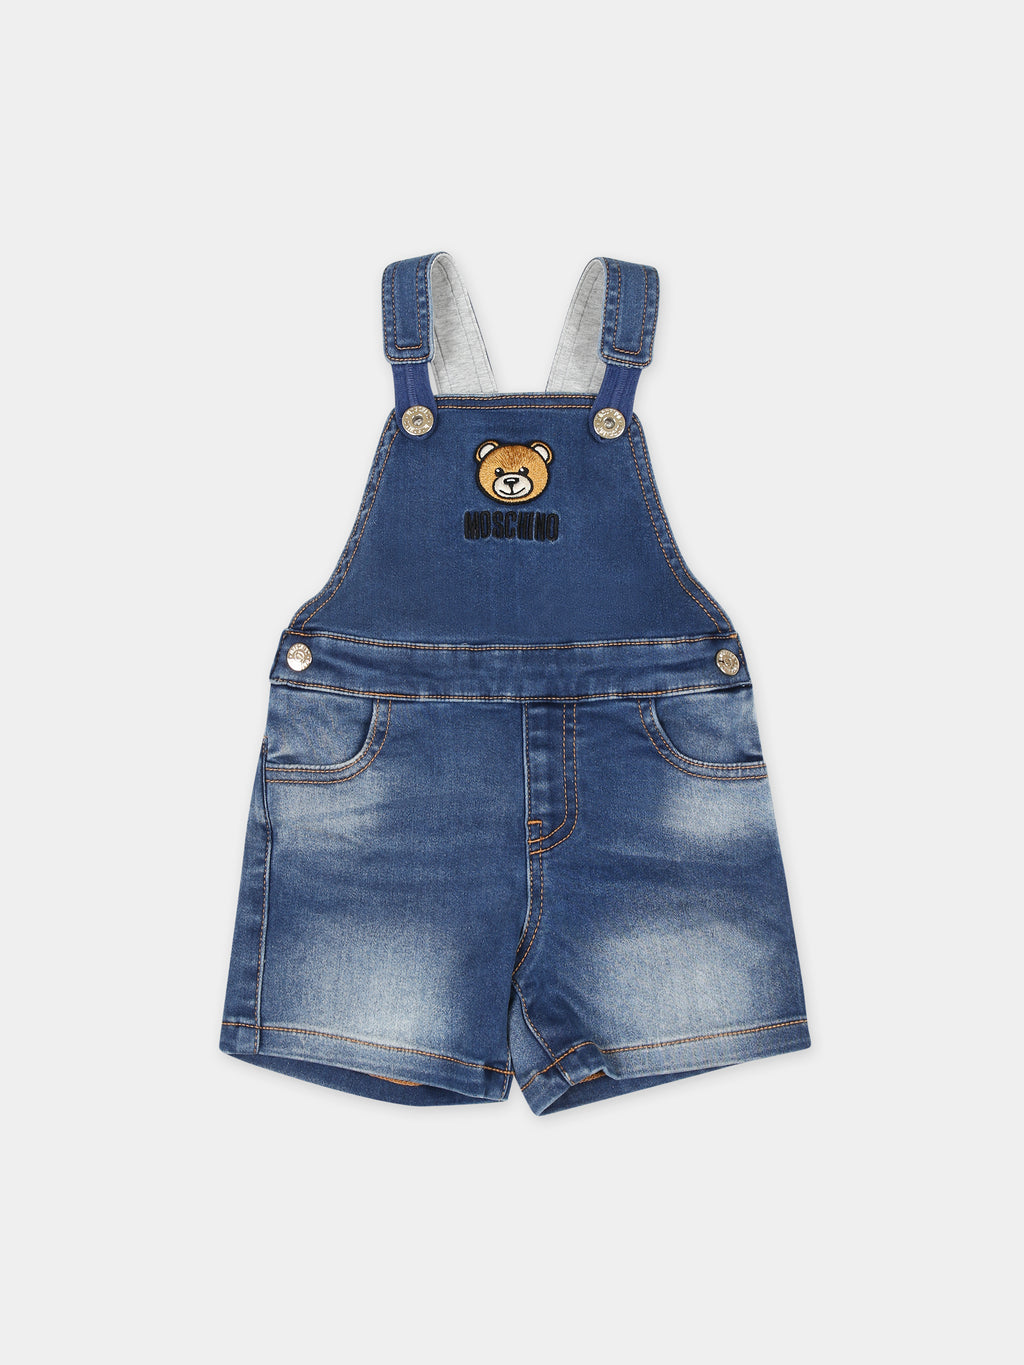 Blue dungarees for babykids with Teddy Bear and logo